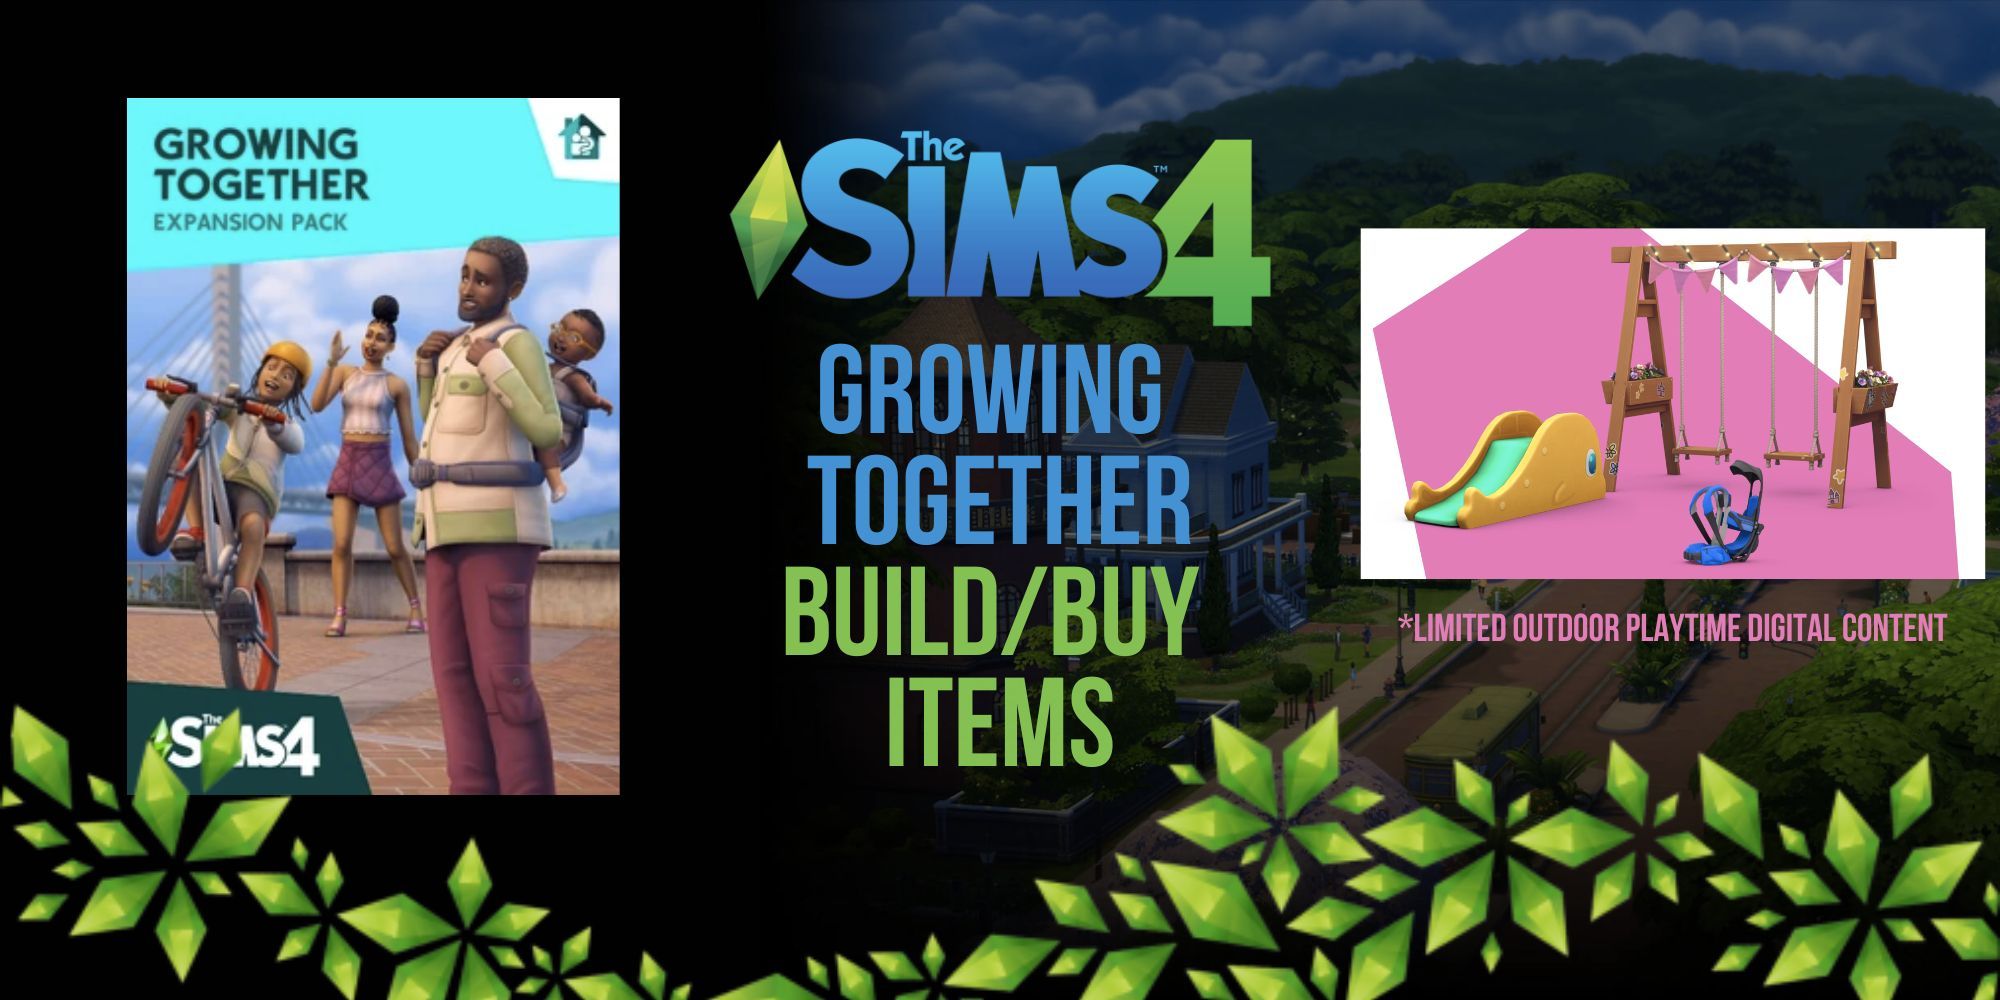 The Sims 4 Luxury Stuff: New Object Collage